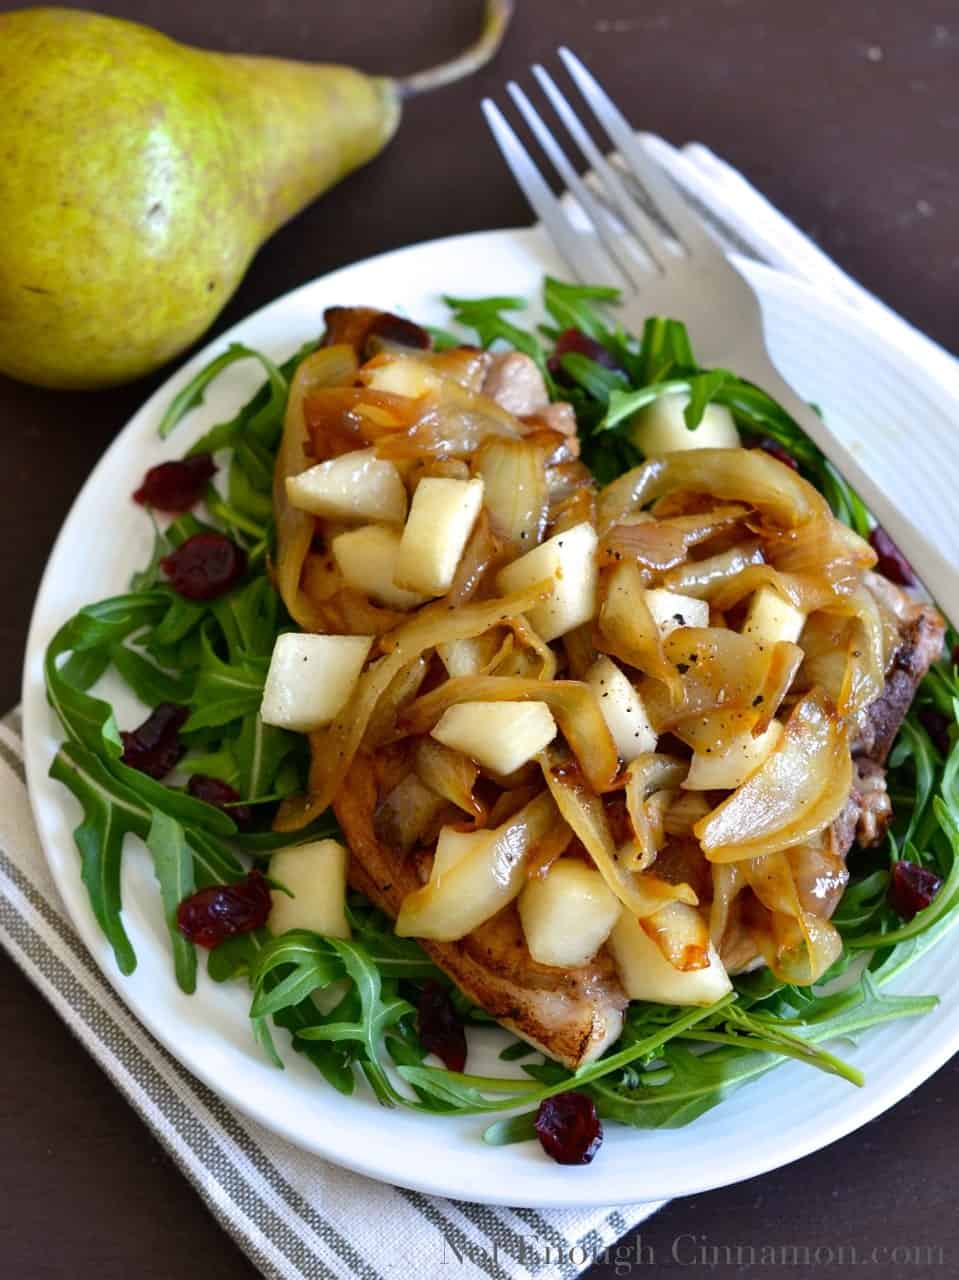 Pear and Caramelized Onions Pork Chops